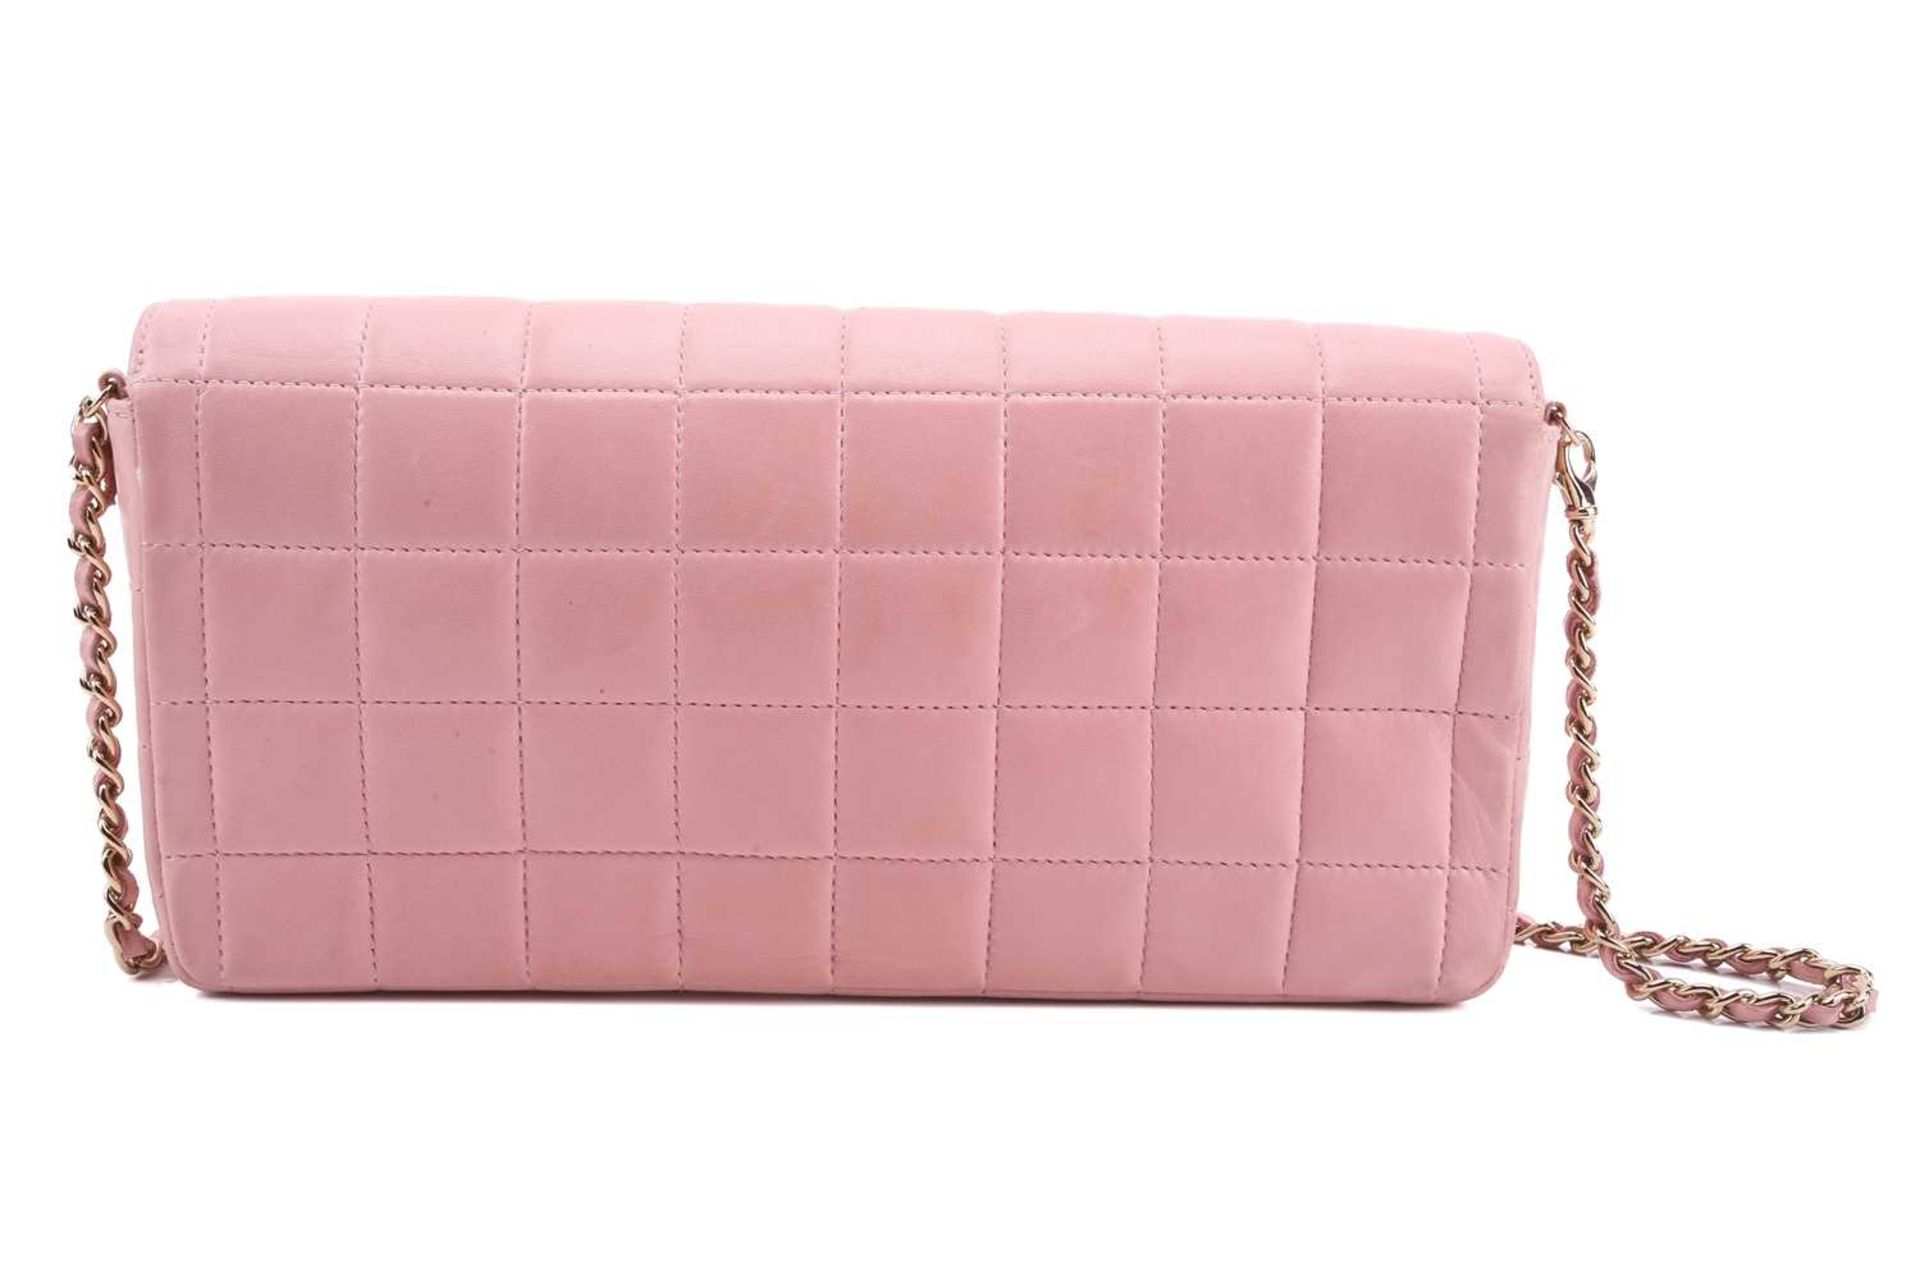 Chanel - an East West Chocolate Bar bag in baby pink lambskin leather, elongated rectangular body - Image 4 of 13